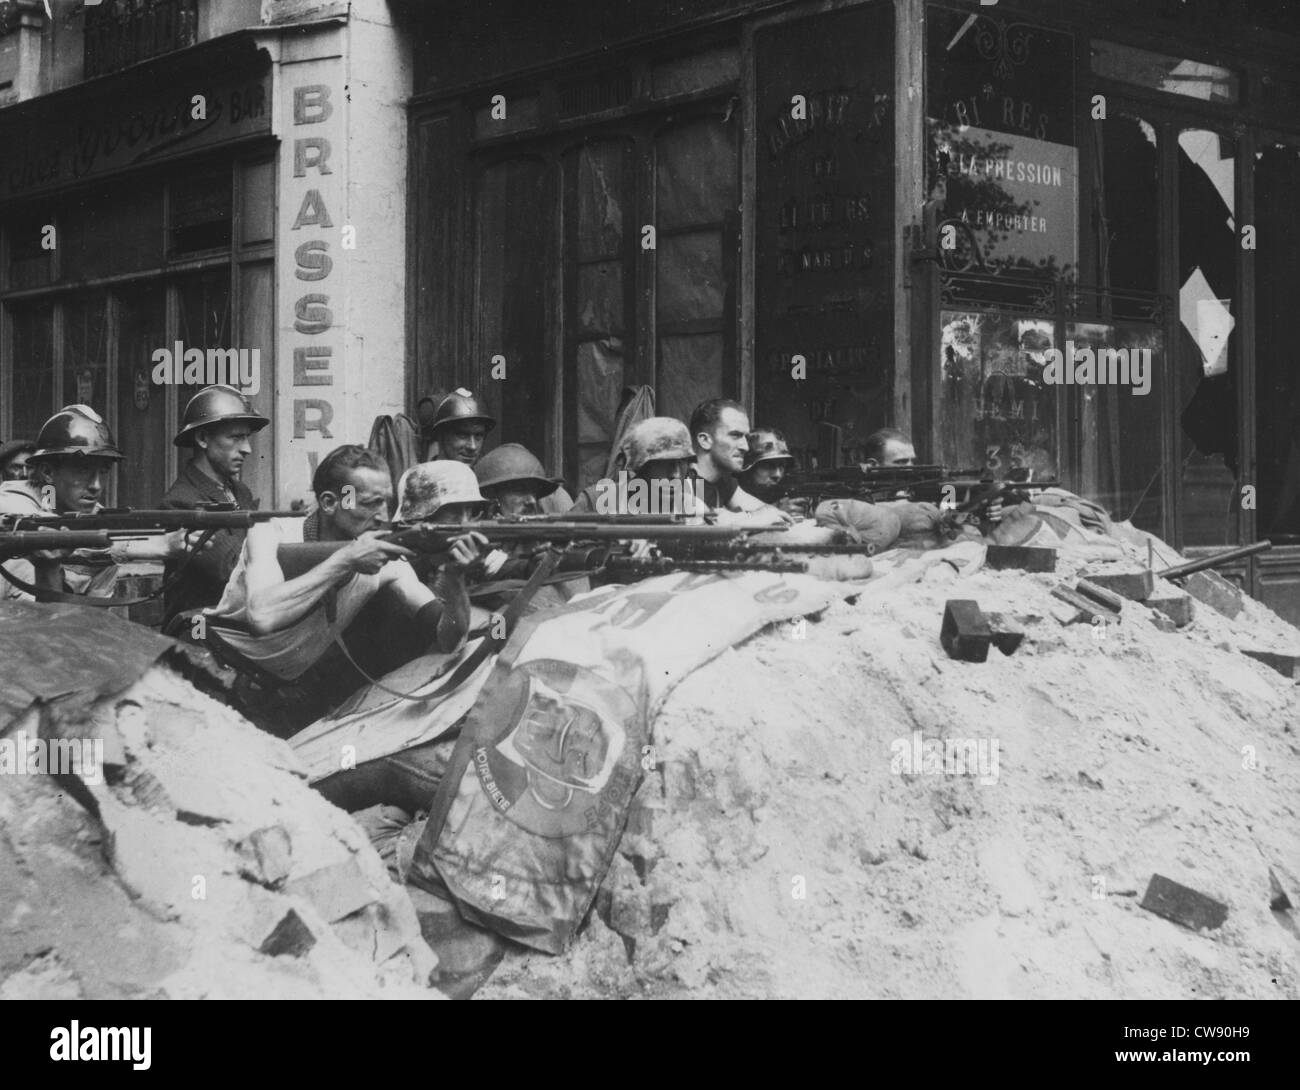 Members F.F.I. lying in ambush in street Paris during Liberation (August 1944) Stock Photo